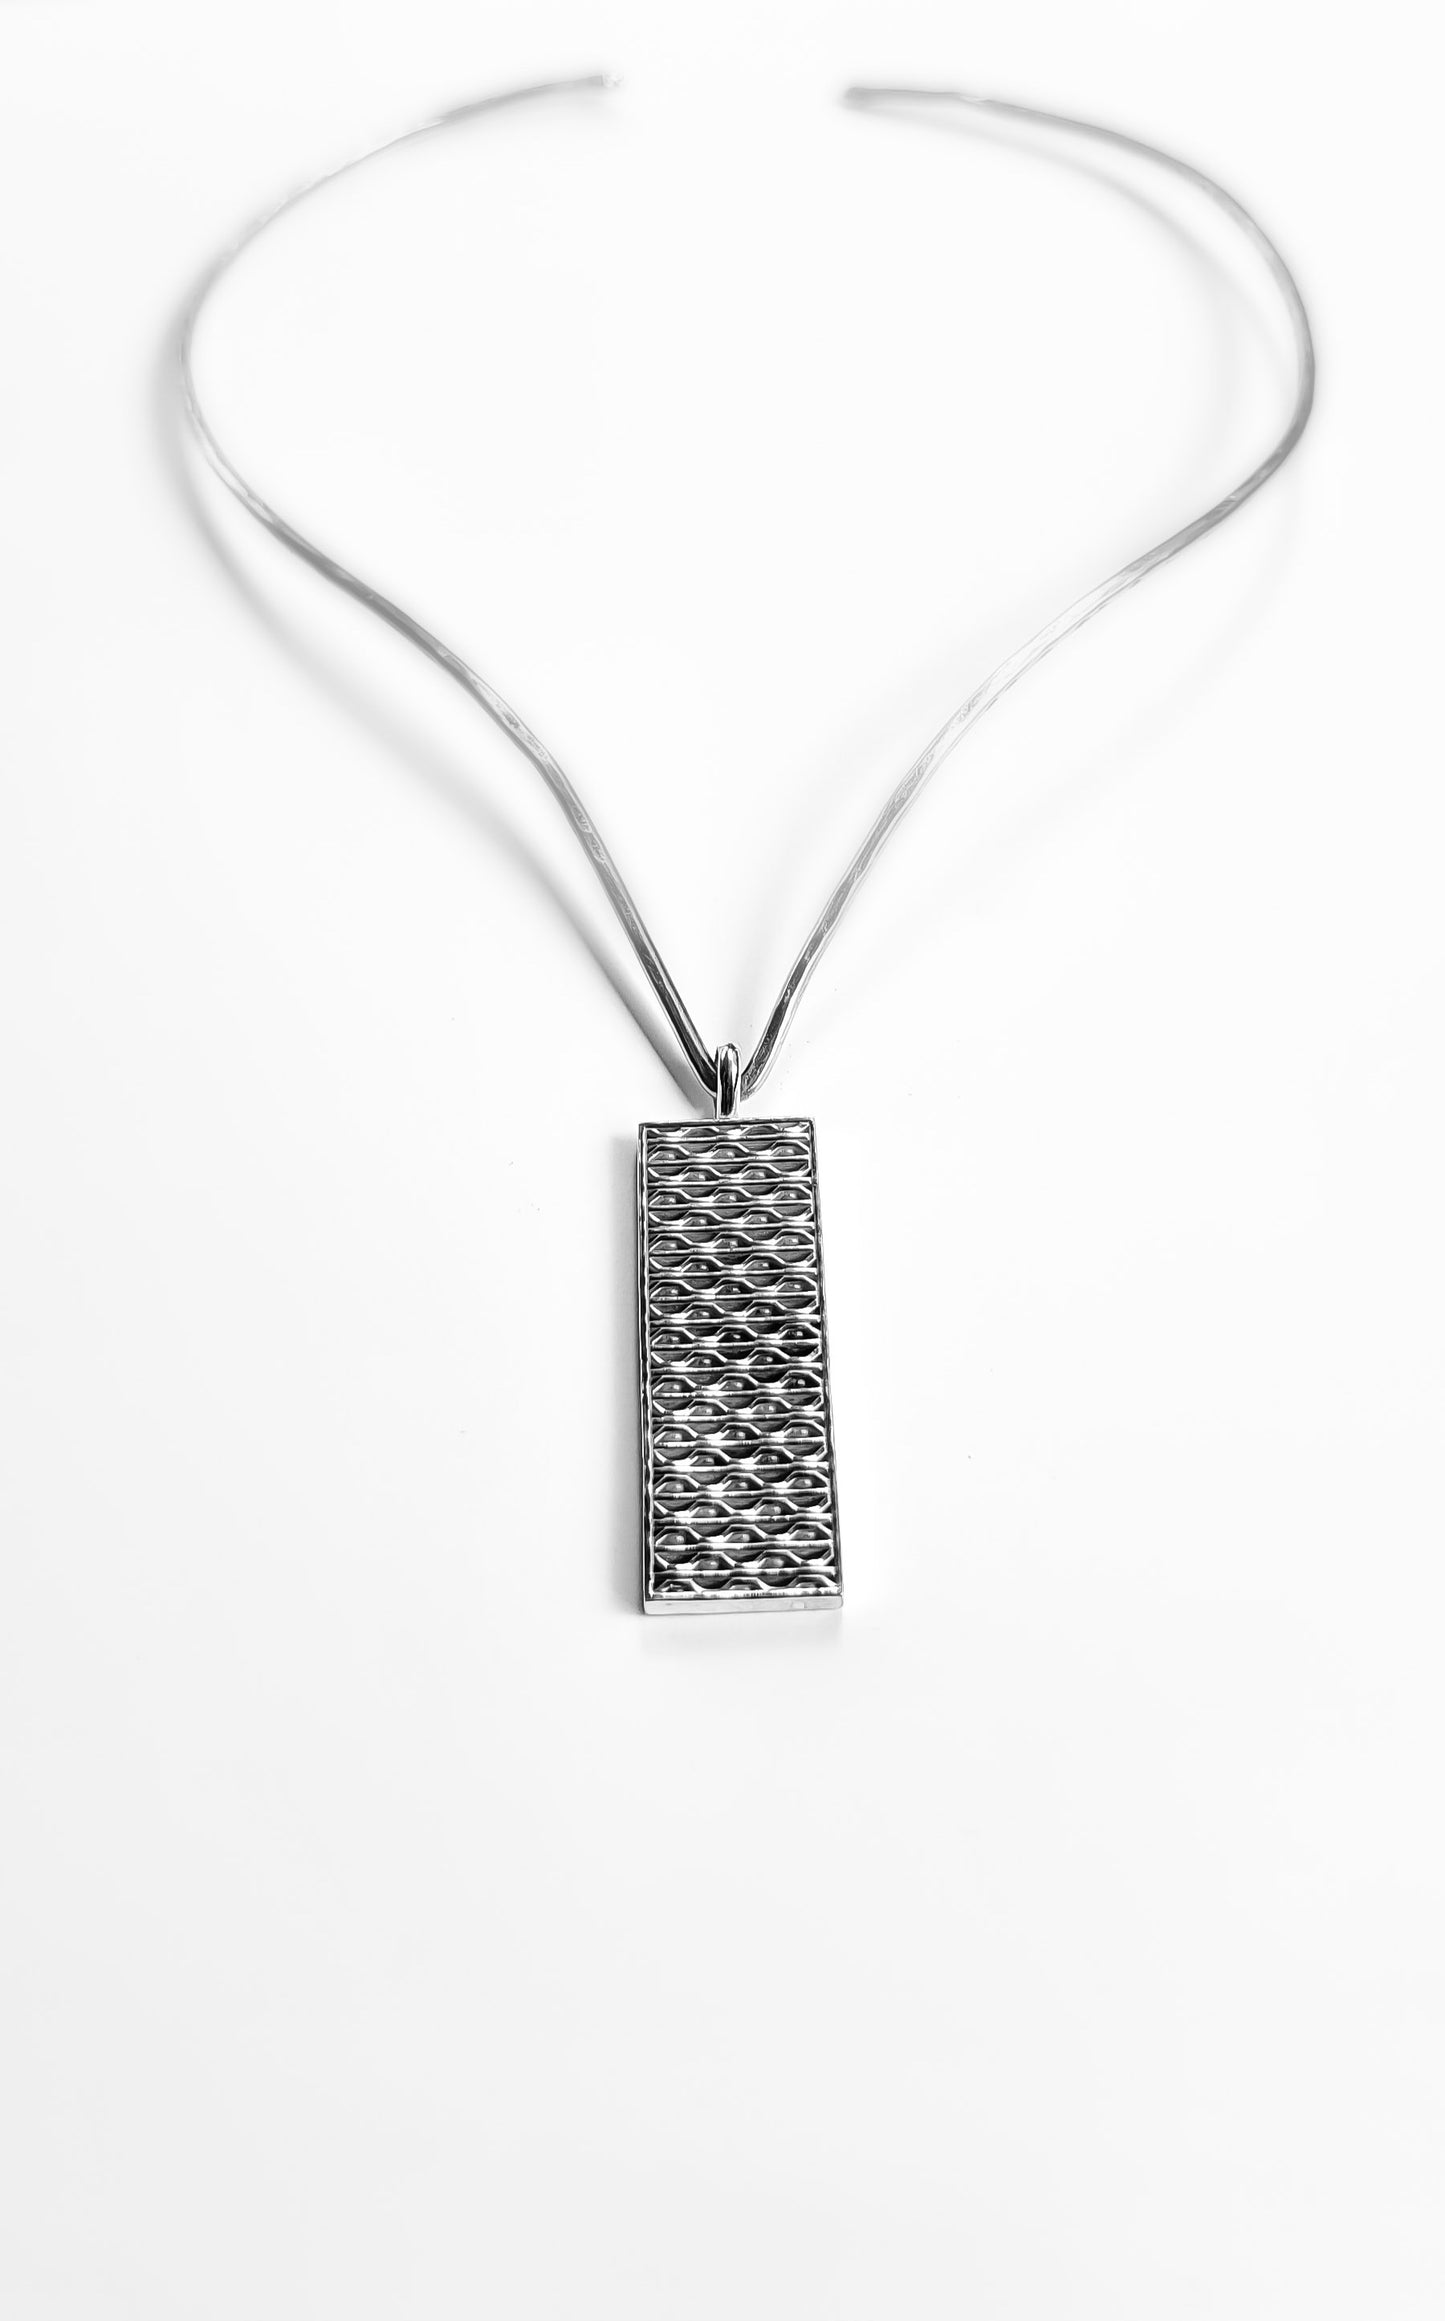 Sterling Silver NYC Subway grate pendent 